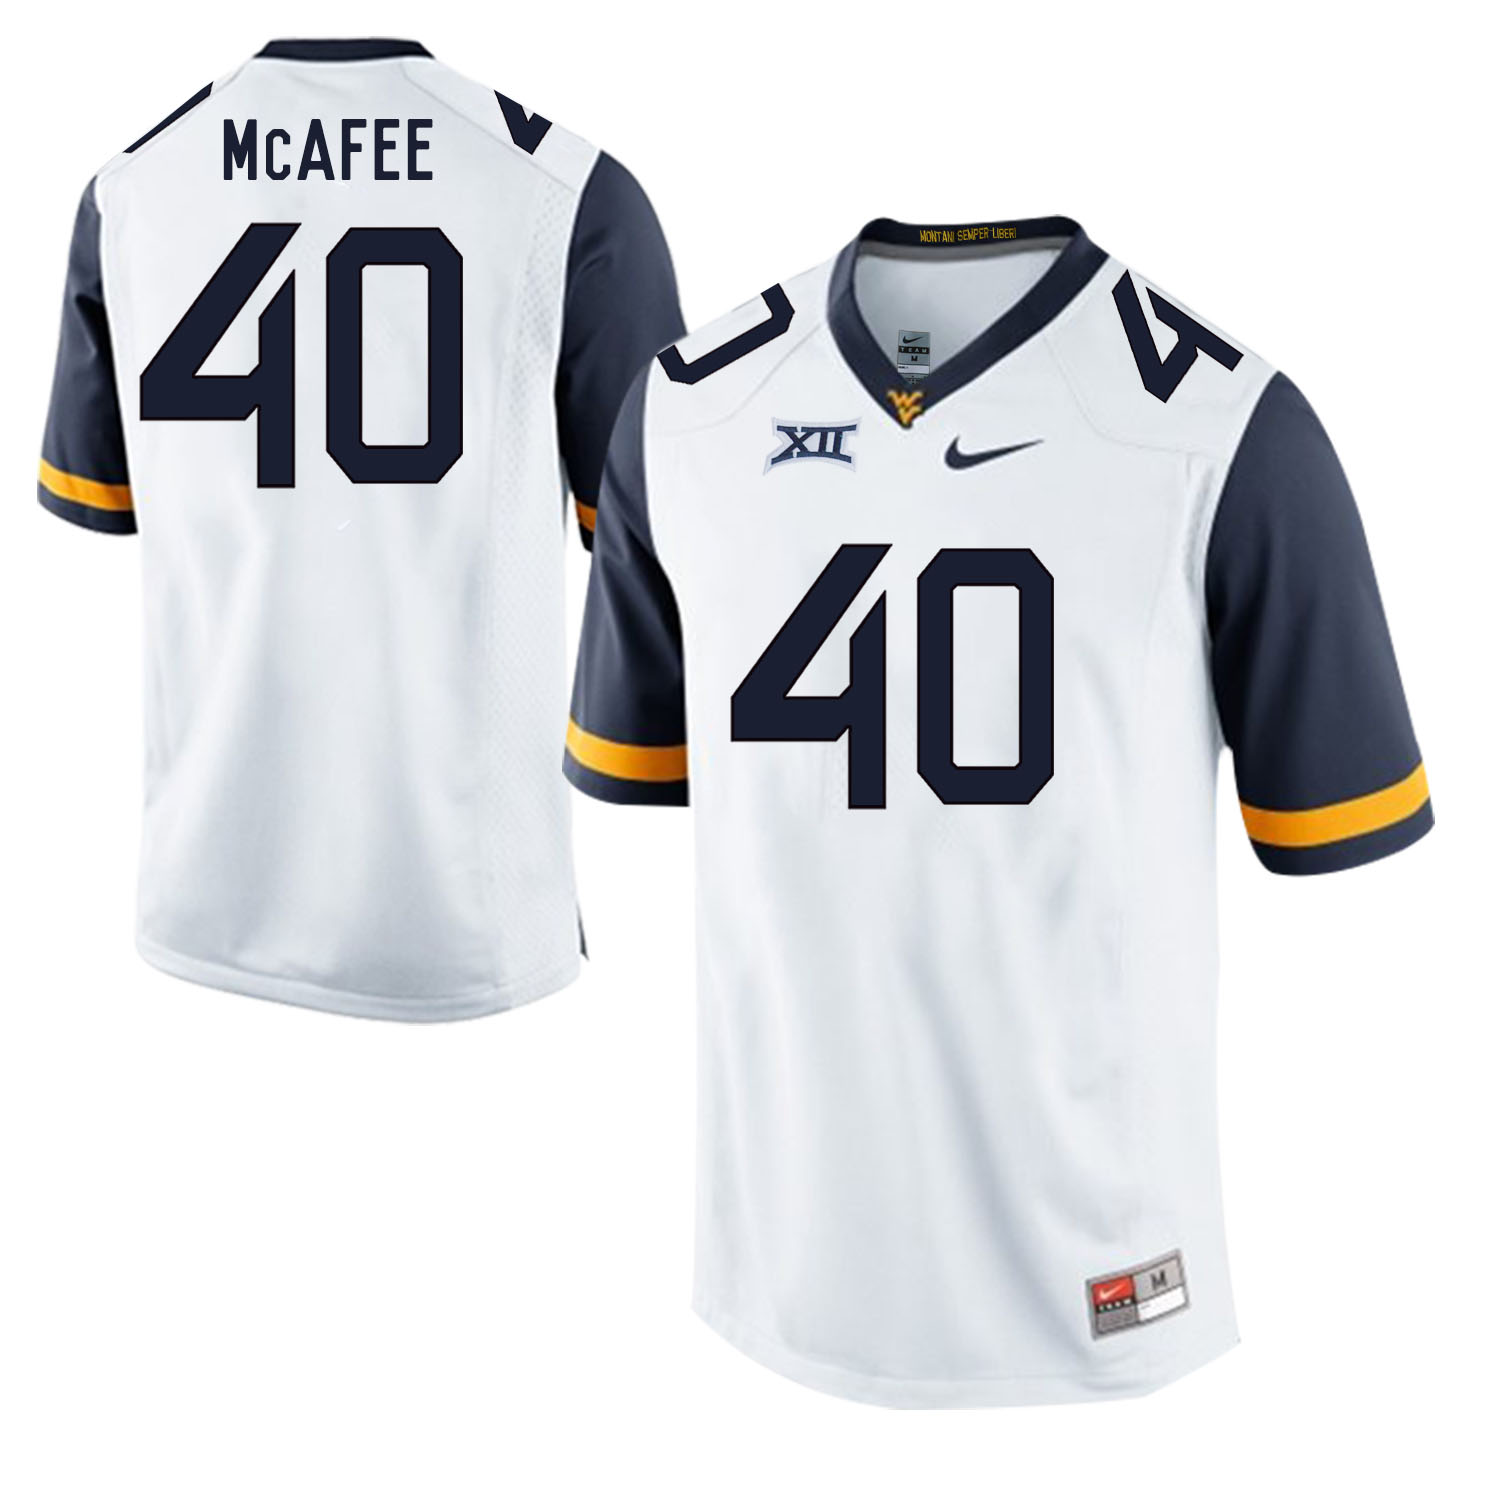 West Virginia Mountaineers 40 Pat McAfee White College Football Jersey